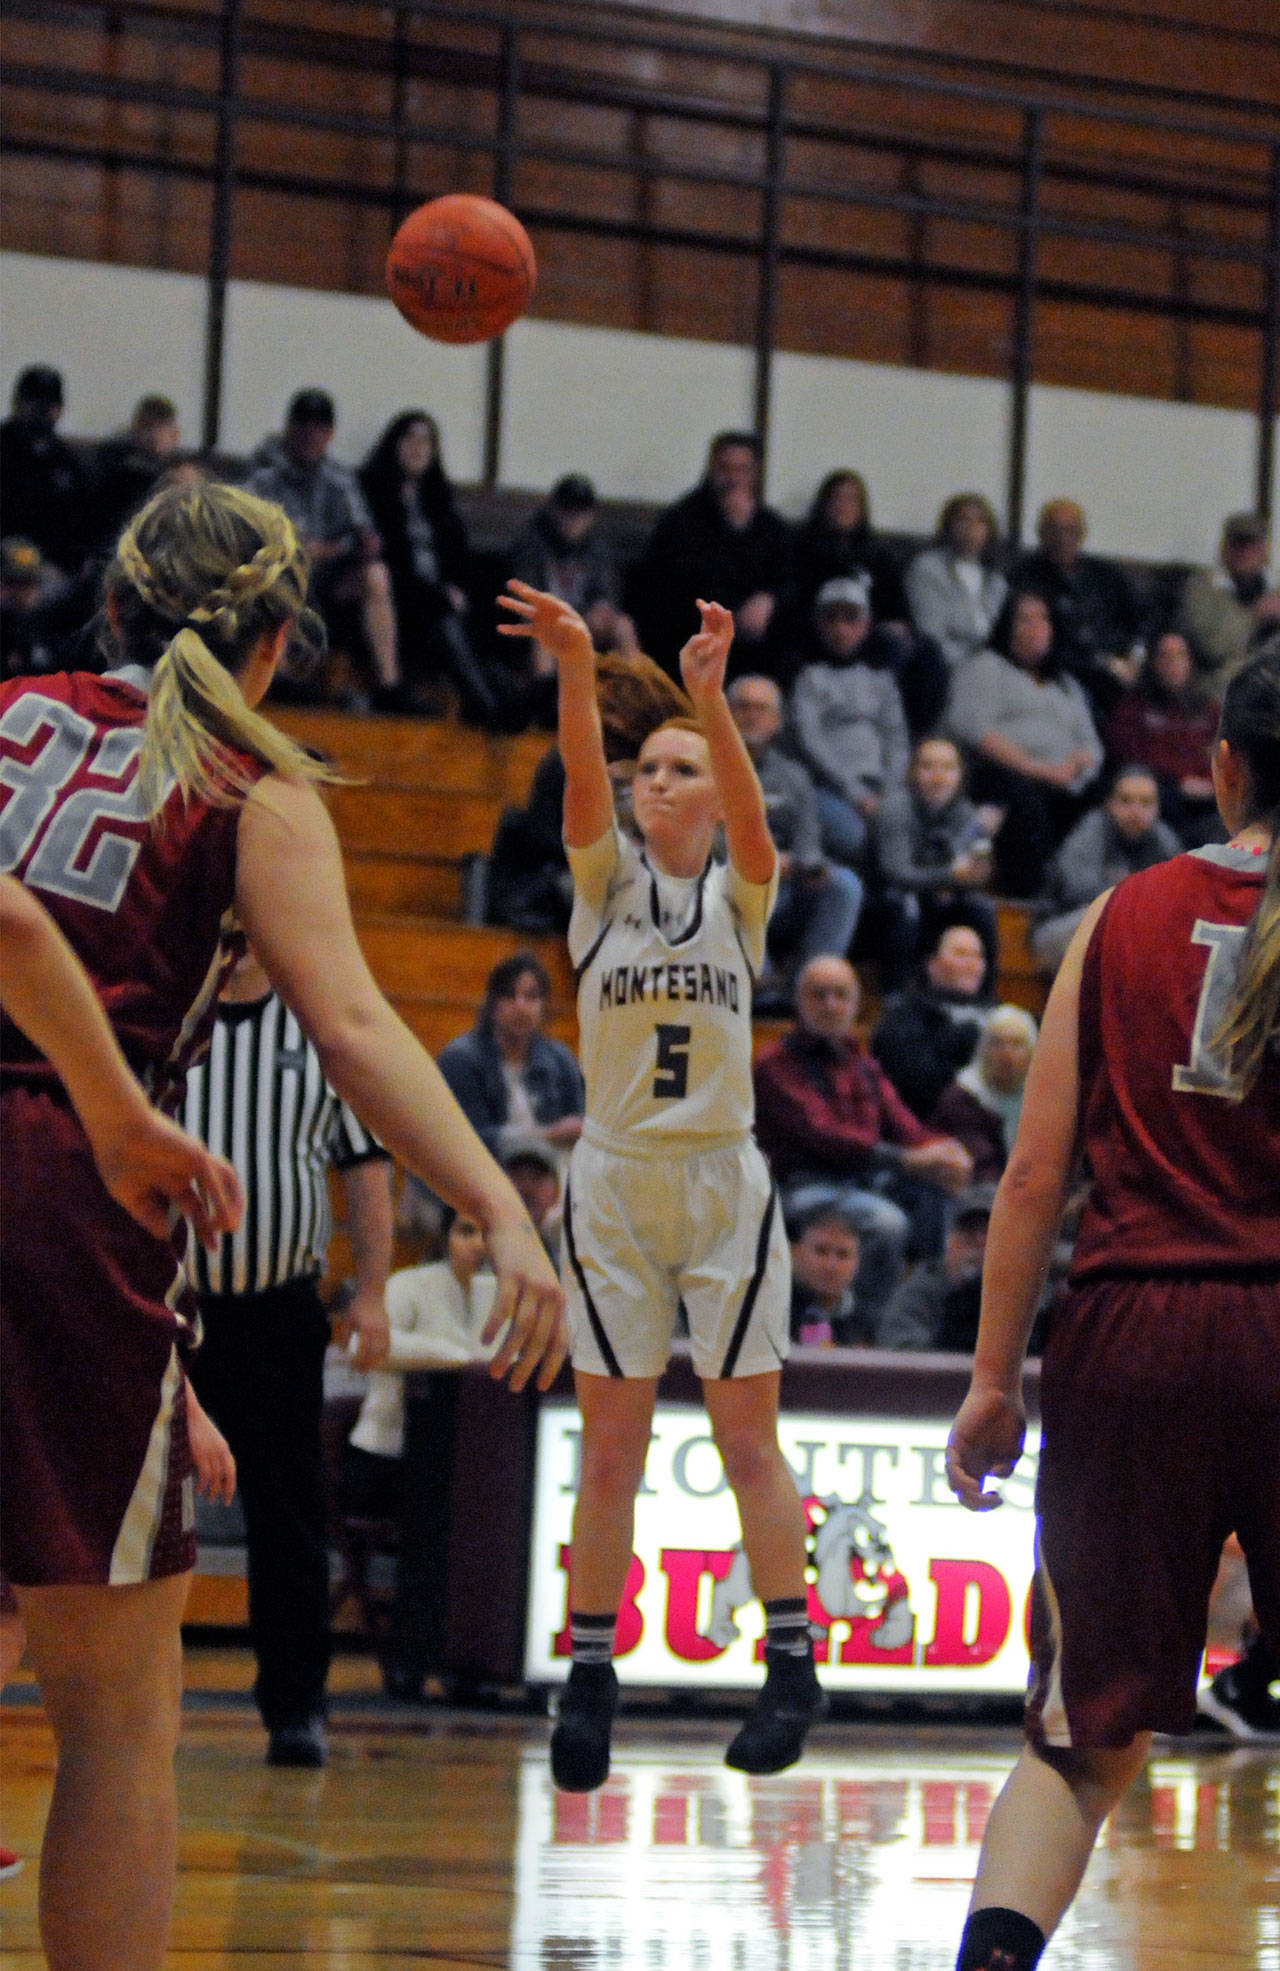 Montesano guard Glory Grubb puts up a shot during Thursday’s game against Hoquiam. Grubb scored eight points, six of those coming off two 3-pointers in the fourth quarter to help the Bulldogs pull away. (Ryan Sparks | Grays Harbor News Group)